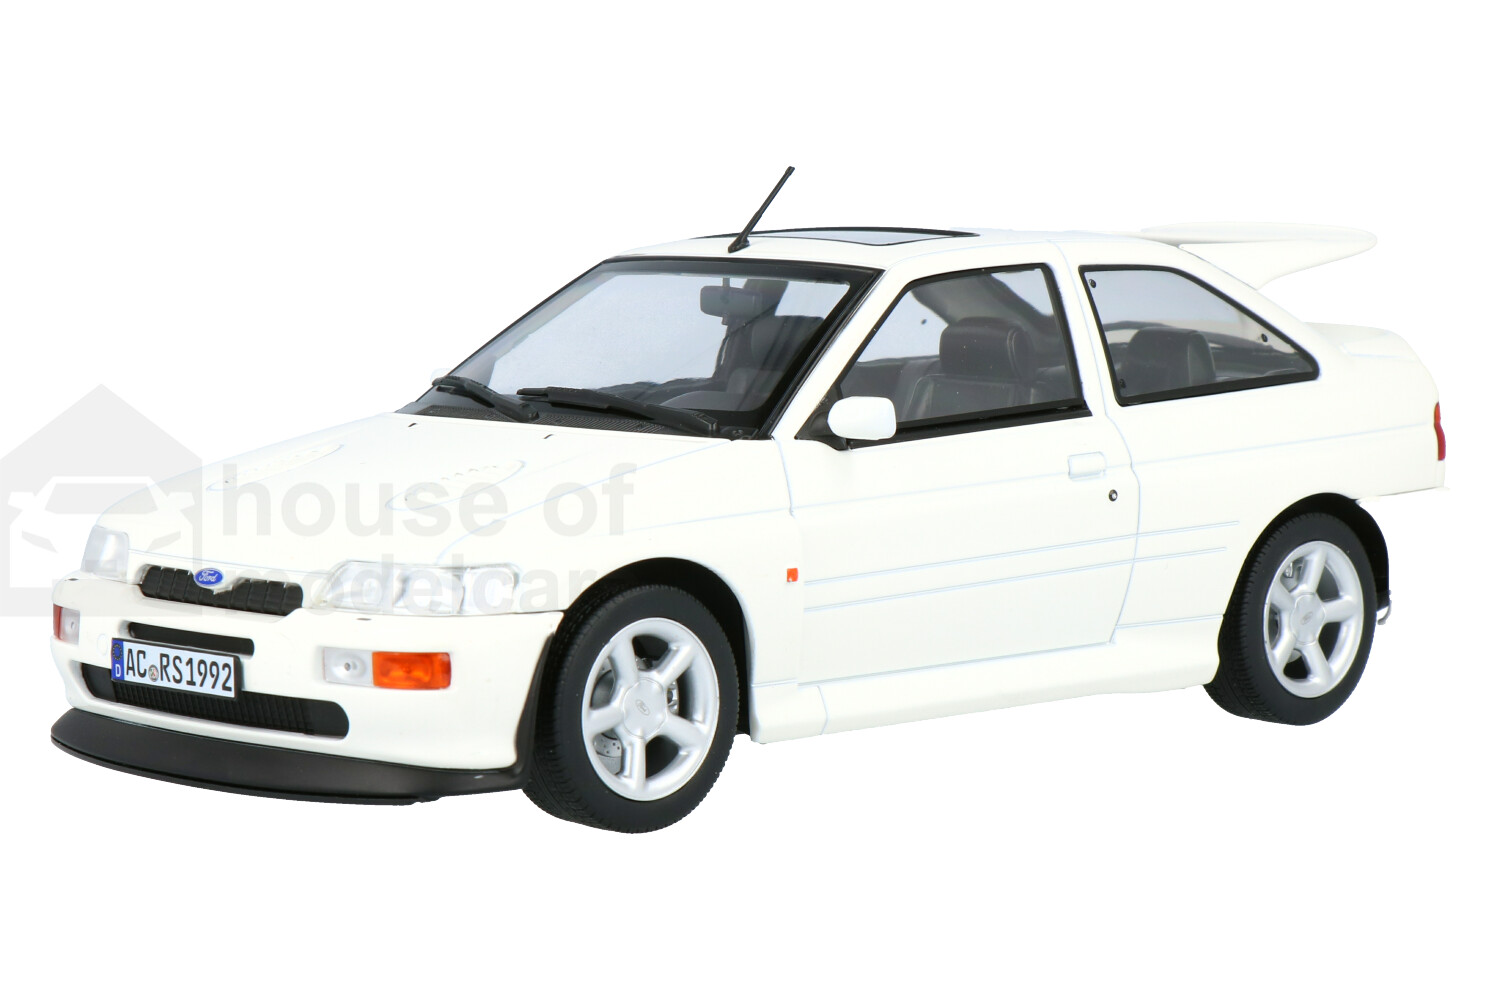 Ford-Escort-Cosworth-182776_13153551091827764-NorevFord-Escort-Cosworth-182776_Houseofmodelcars_.jpg